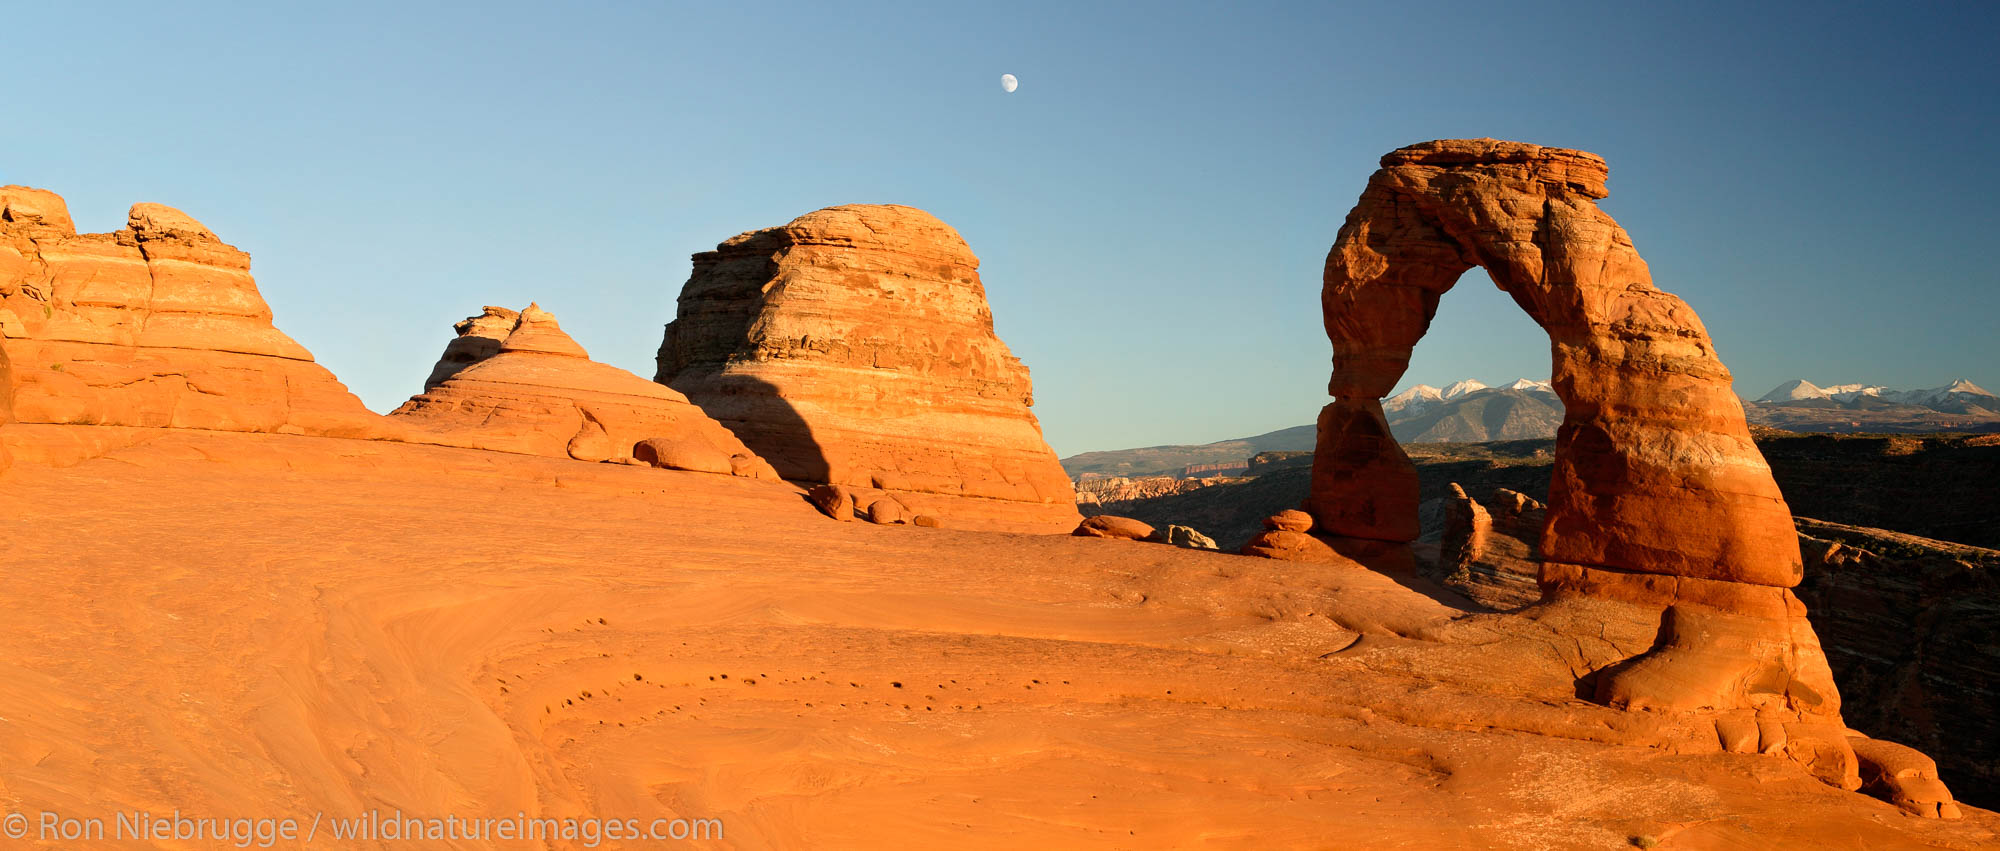 Delicate Arch, Arches National Park, near Moab, Utah.